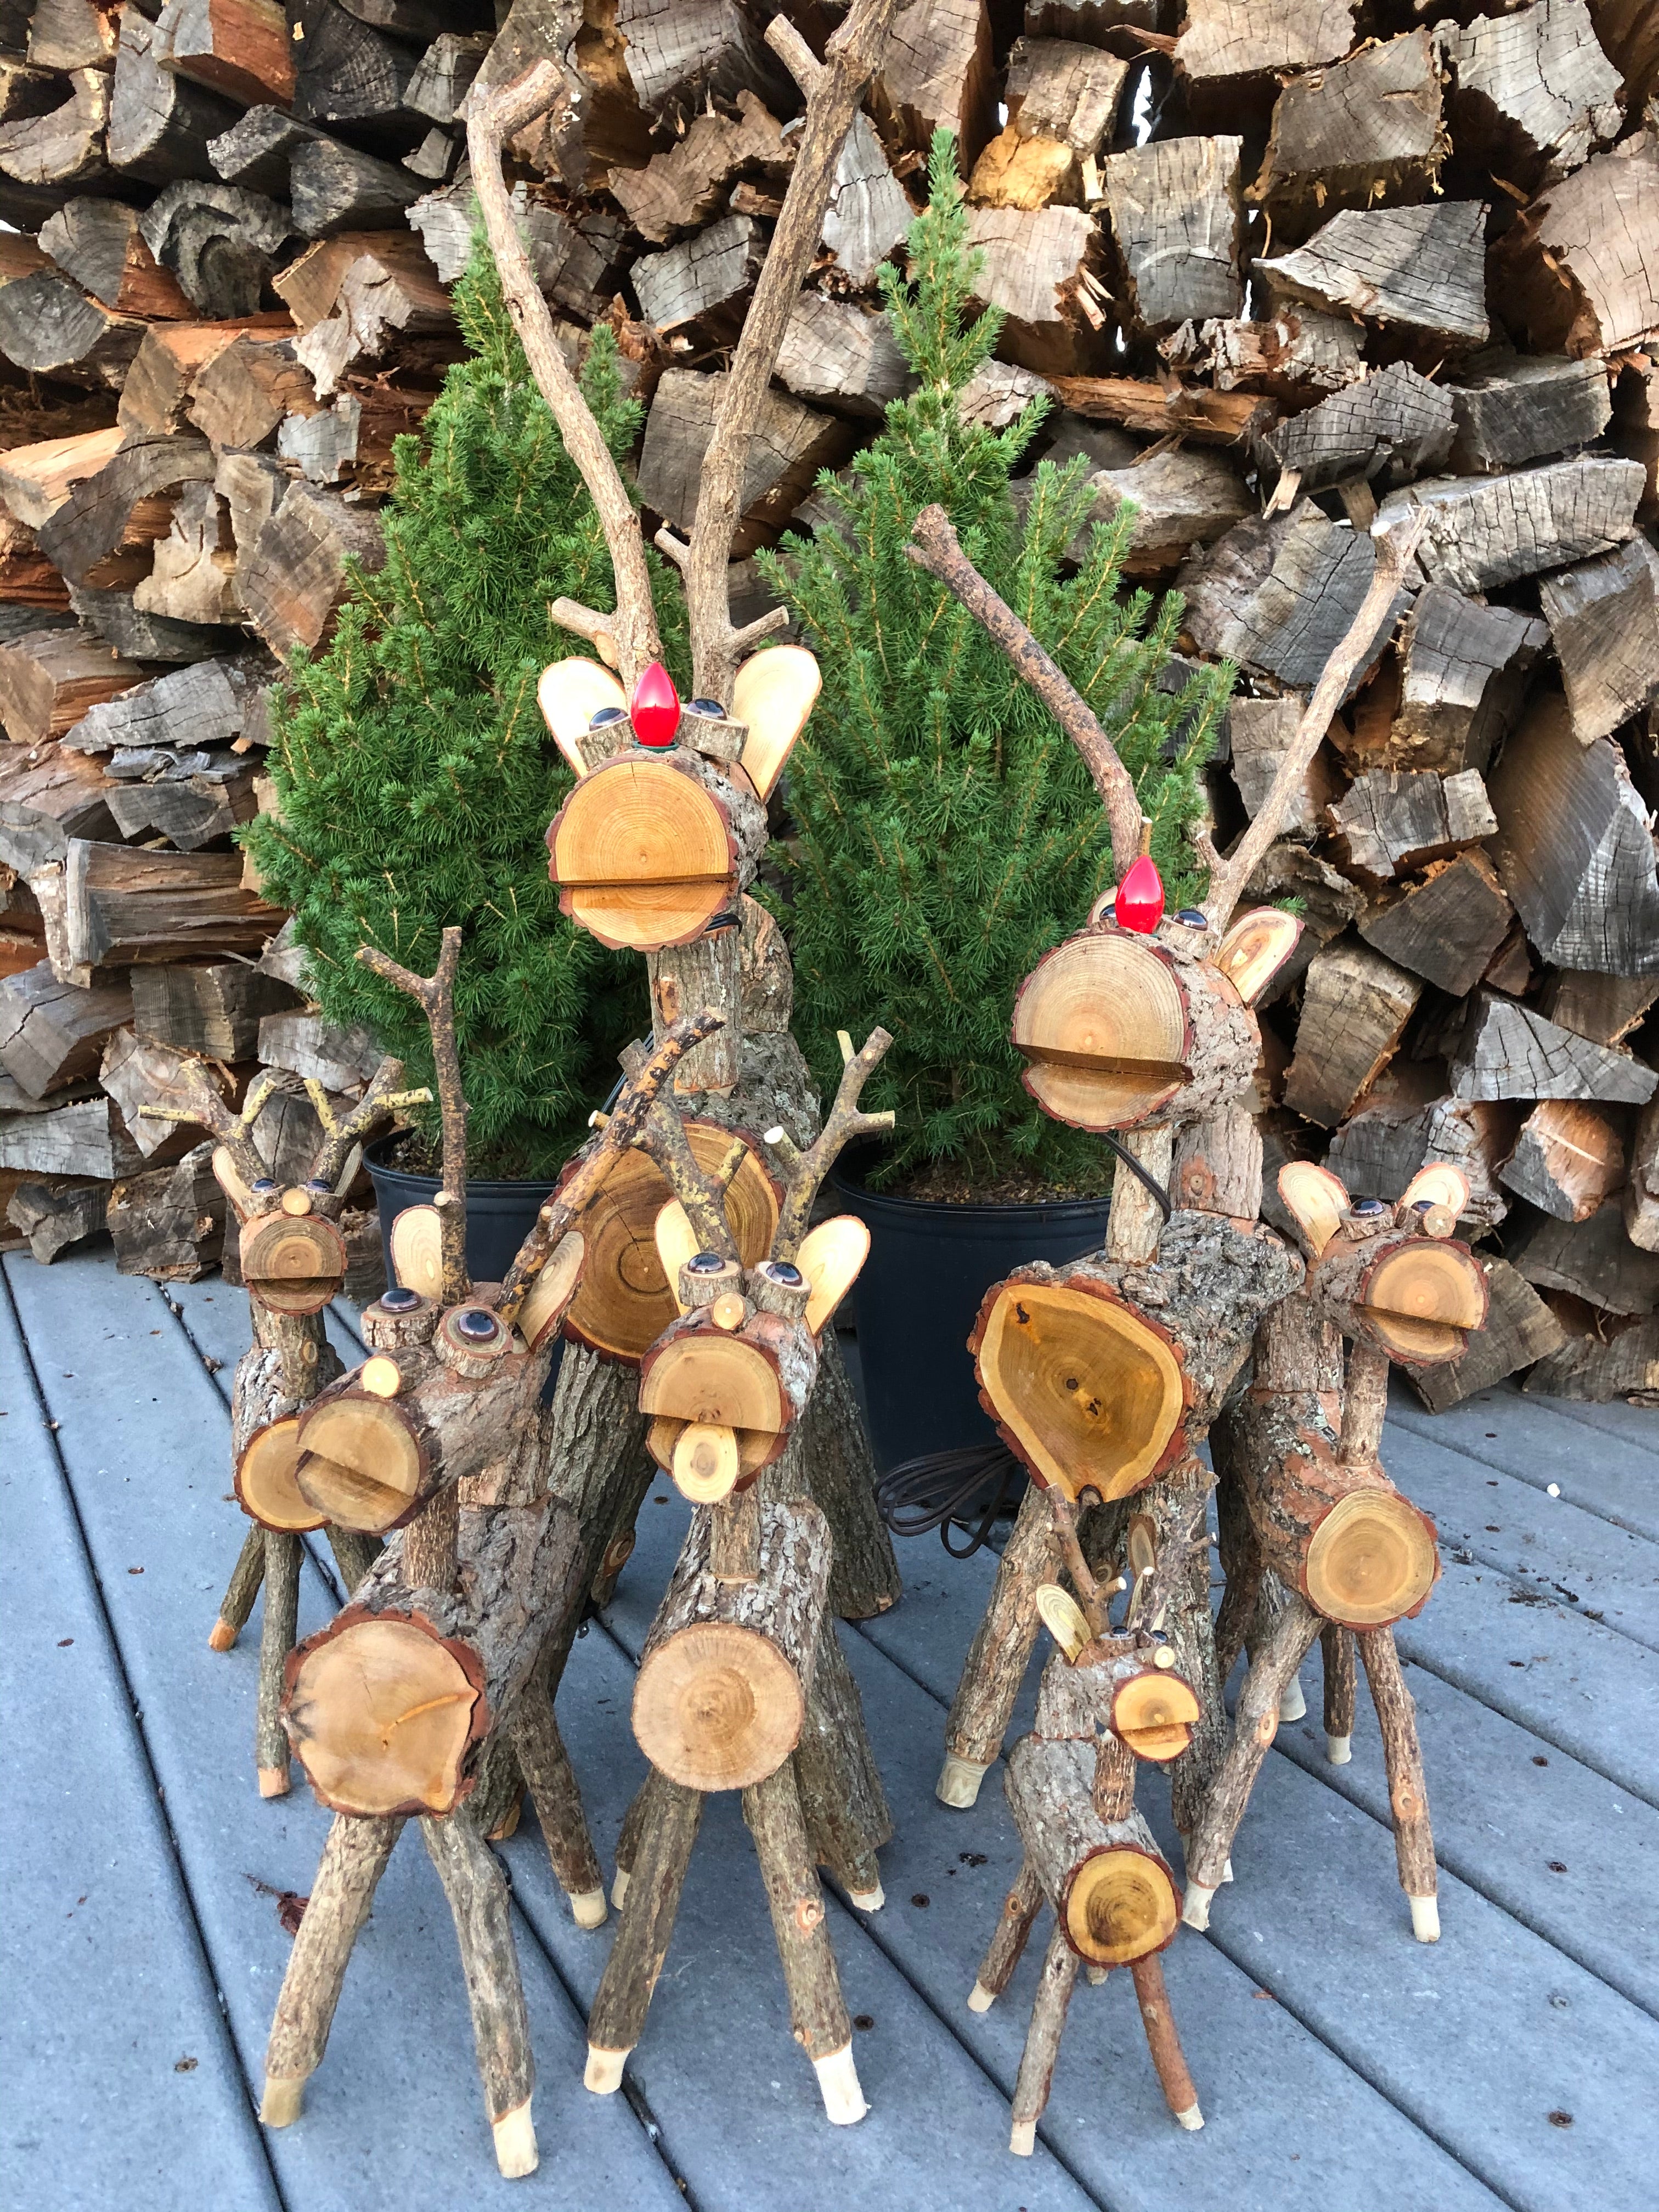 How to make a wooden reindeer from logs